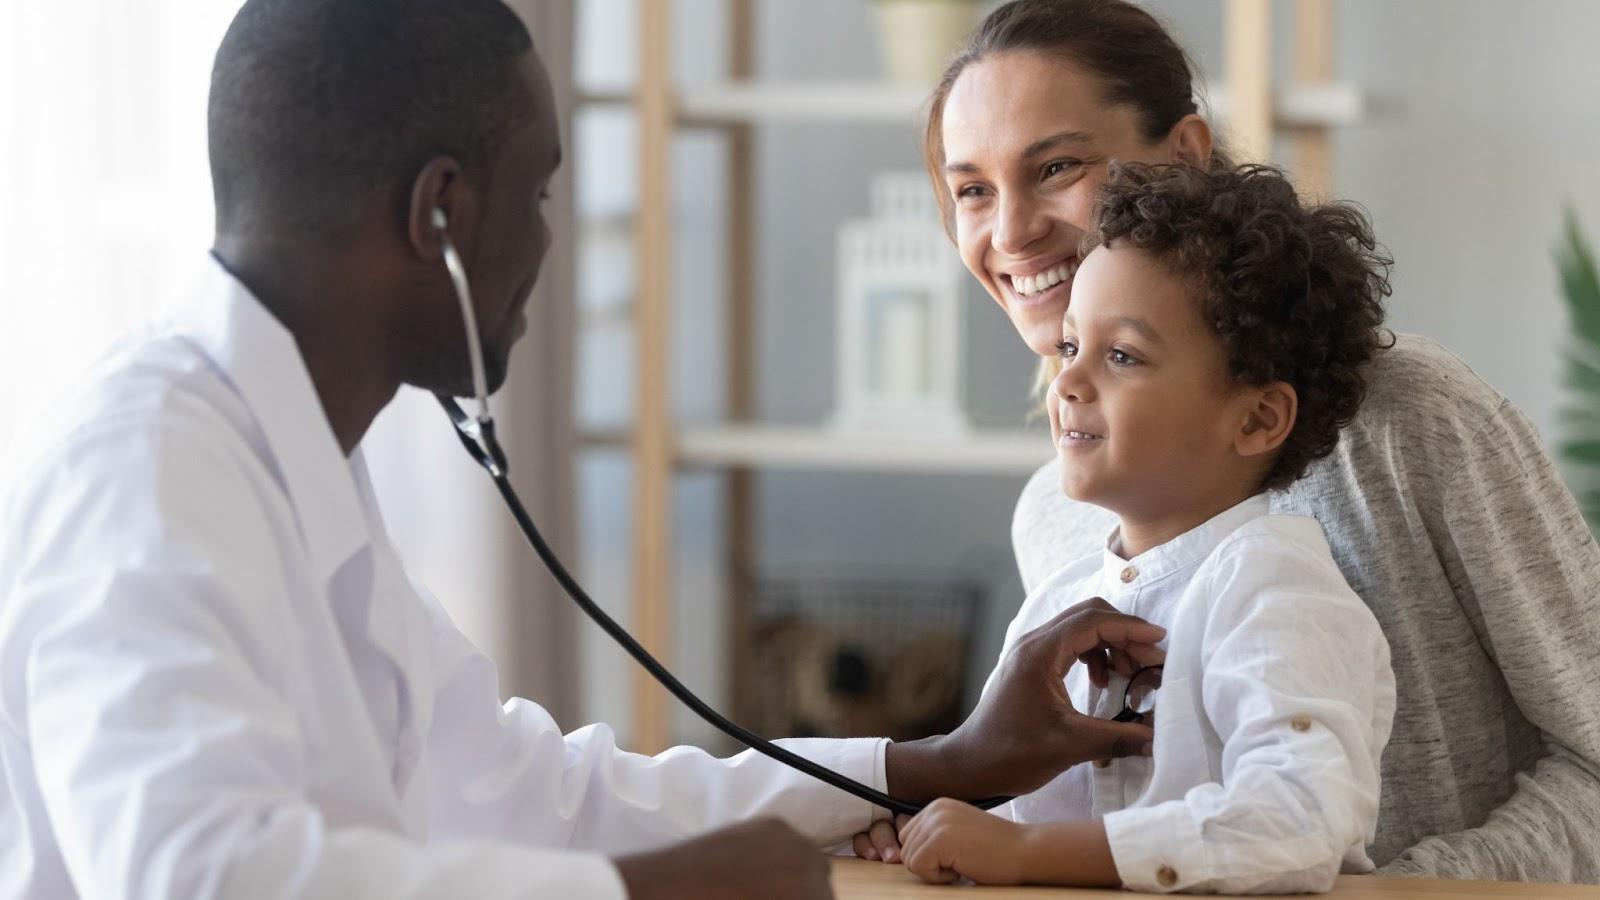 A doctor holding a stethoscope to a child’s chest. The child is sat on his mother’s lap